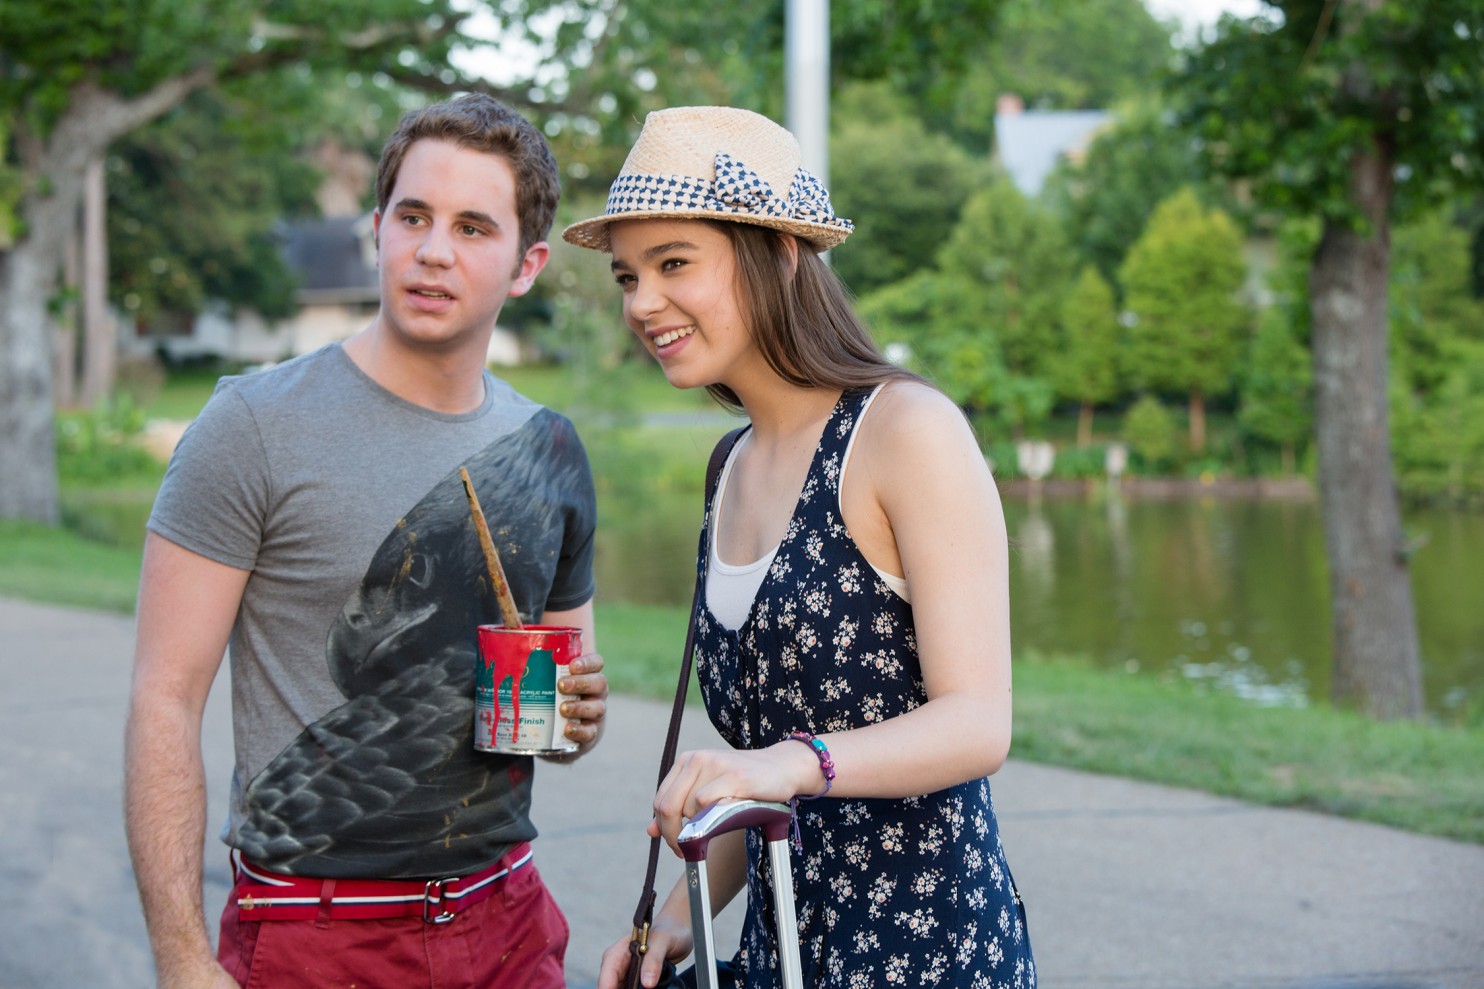 Ben Platt and Hailee Steinfeld in "Pitch Perfect 2." (Photo by Richard Cartwright/Universal Studios)